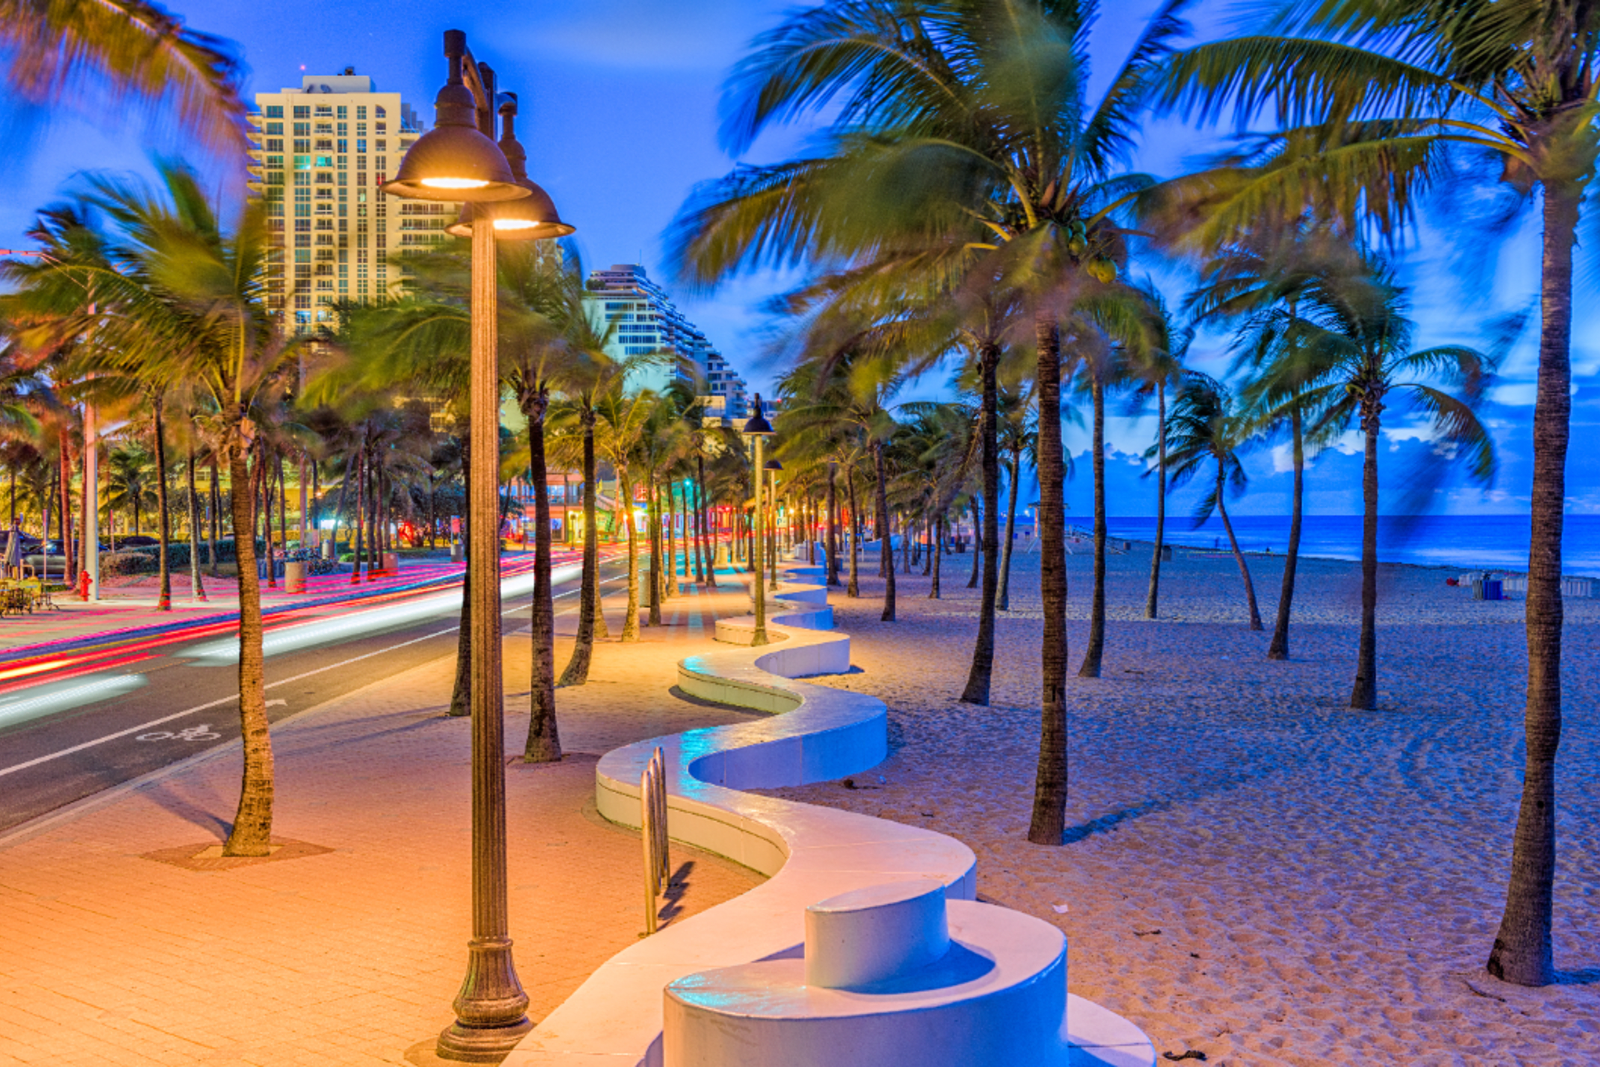 Fort Lauderdale is one of the best spring break destinations for families